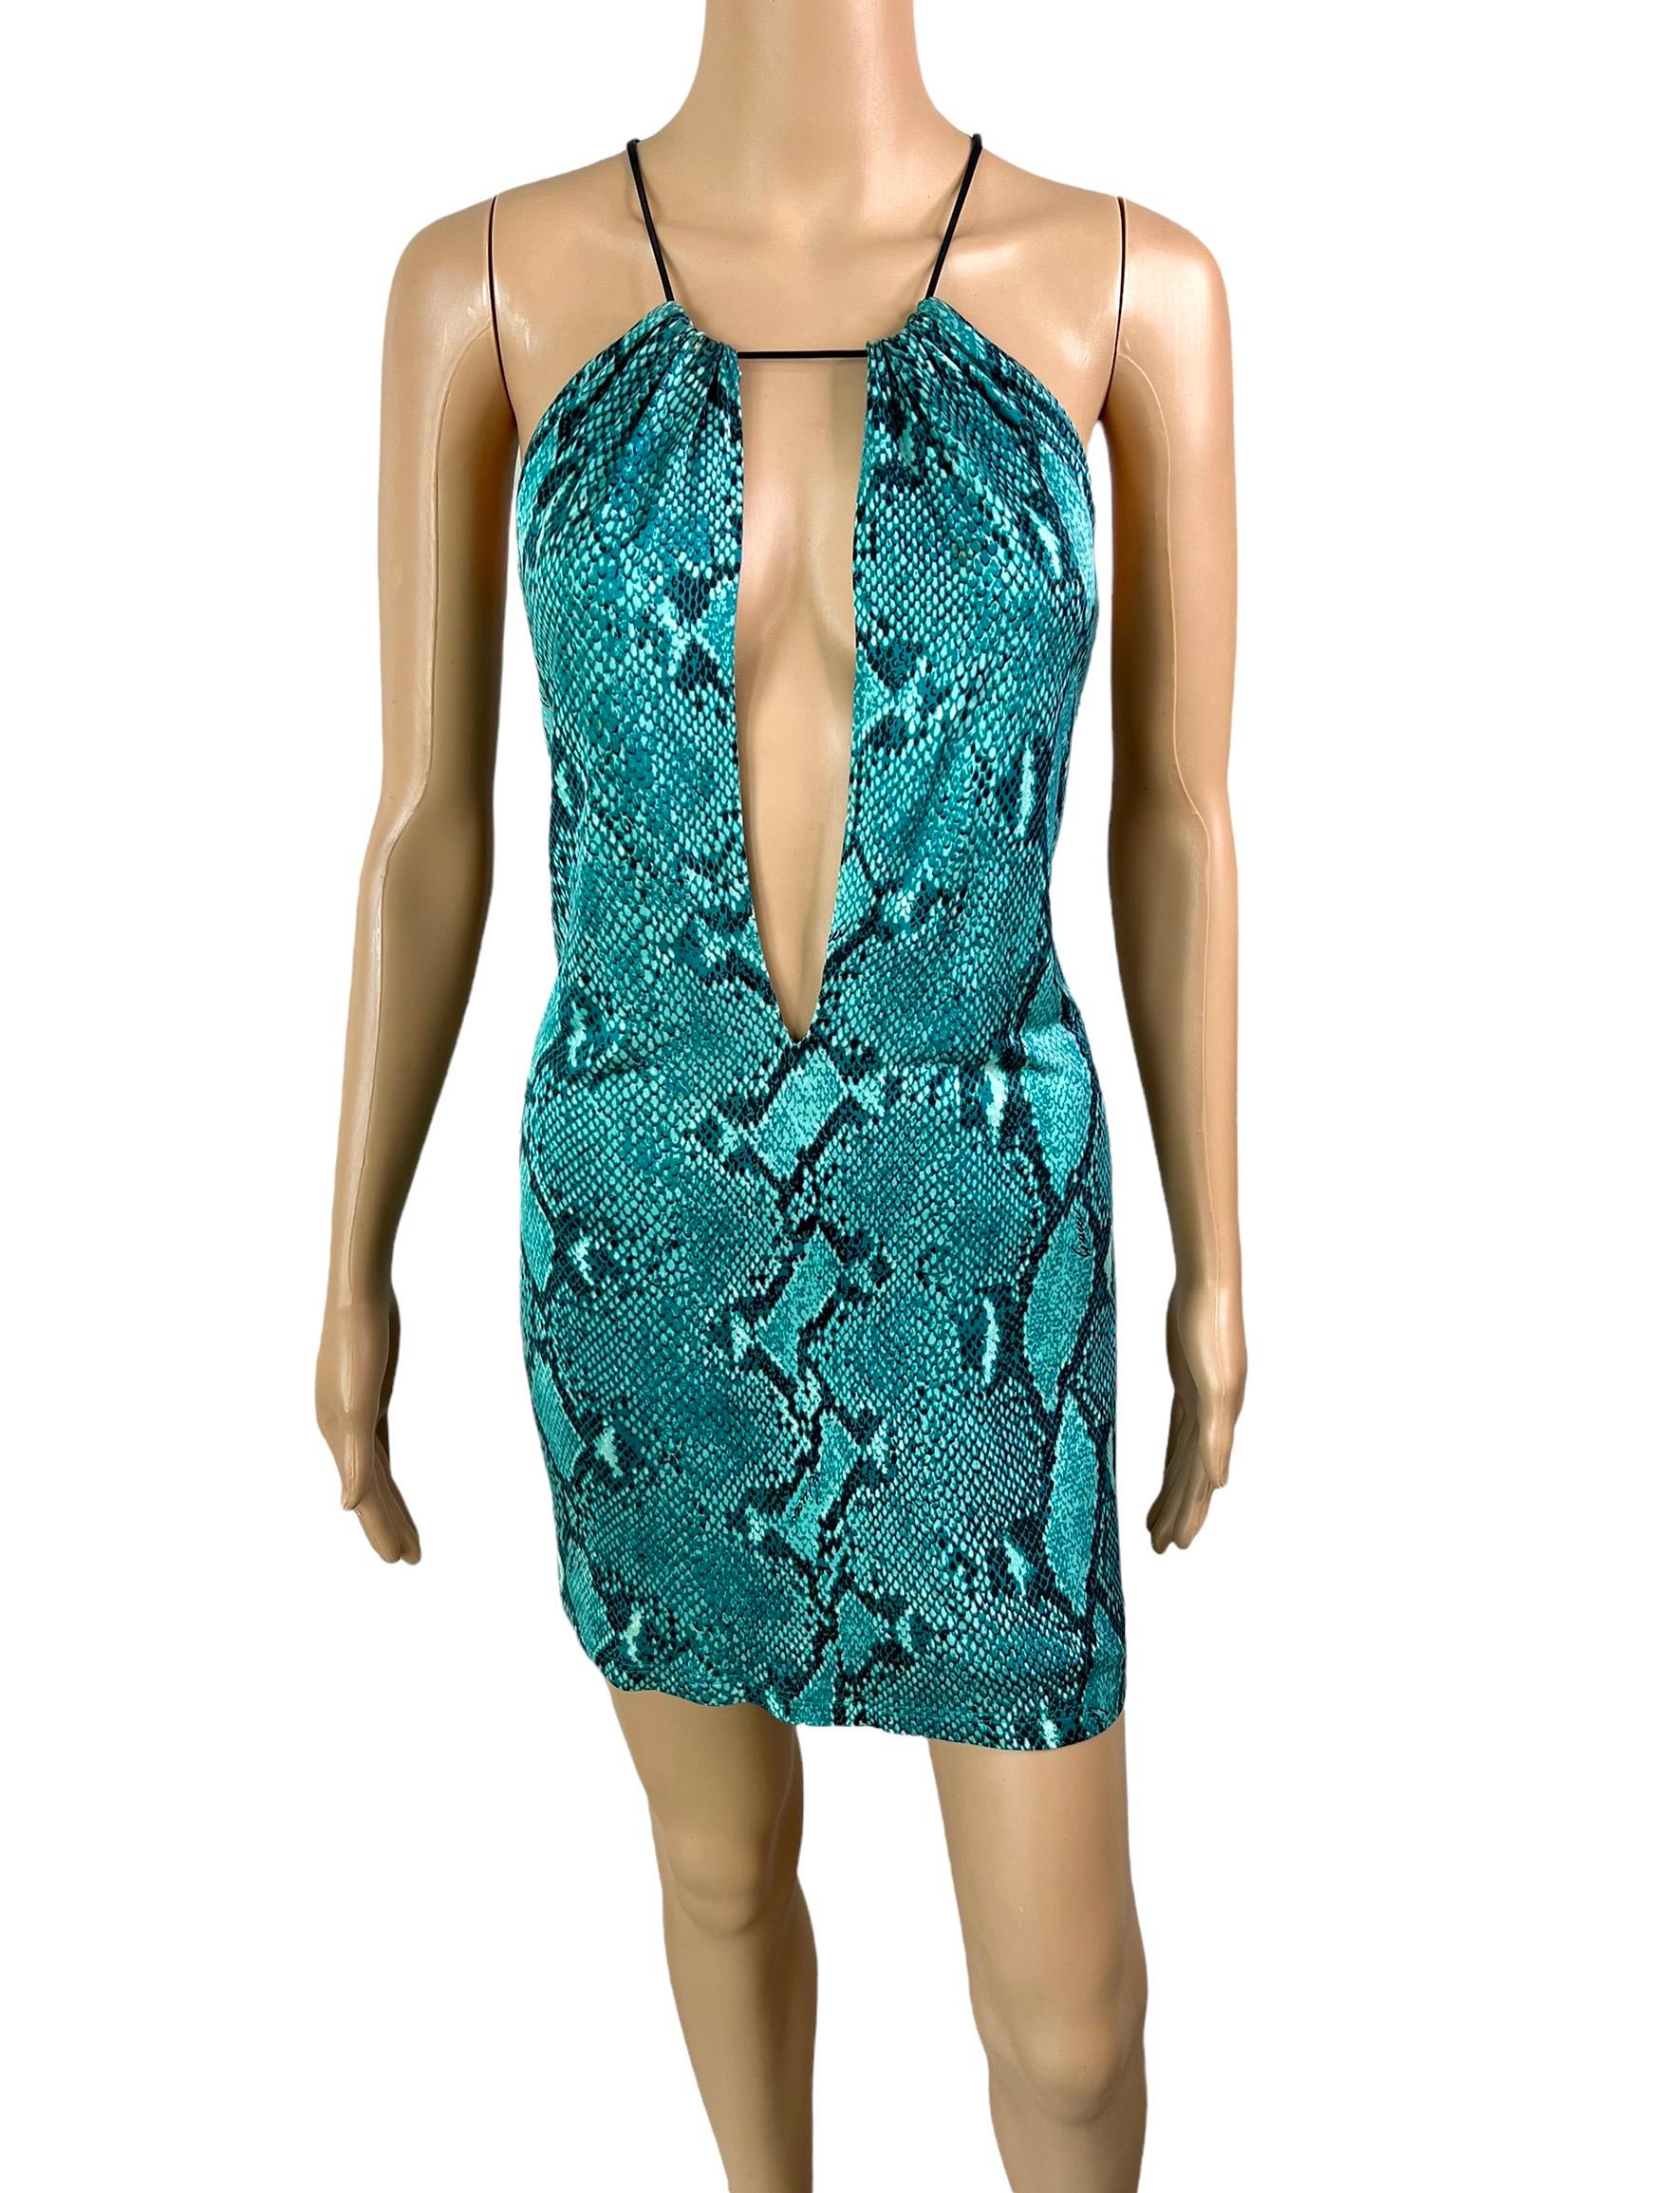 Tom Ford for Gucci S/S 2000 Runway Plunging Python Print Knit Mini Dress 1